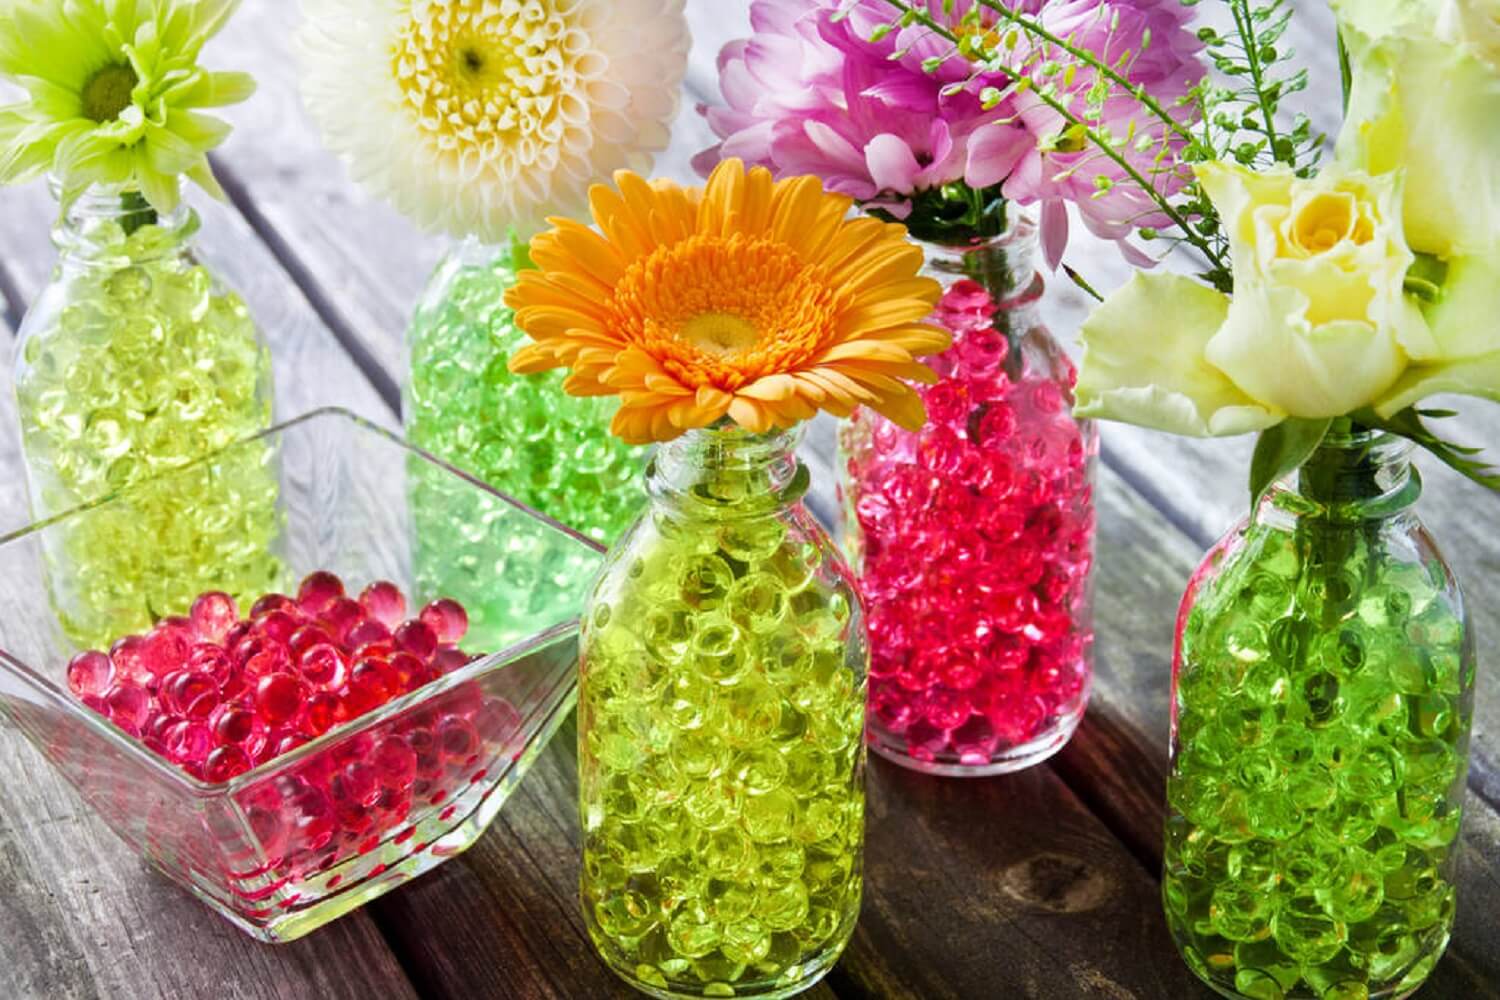 What To Put In A Vase With Fake Flowers